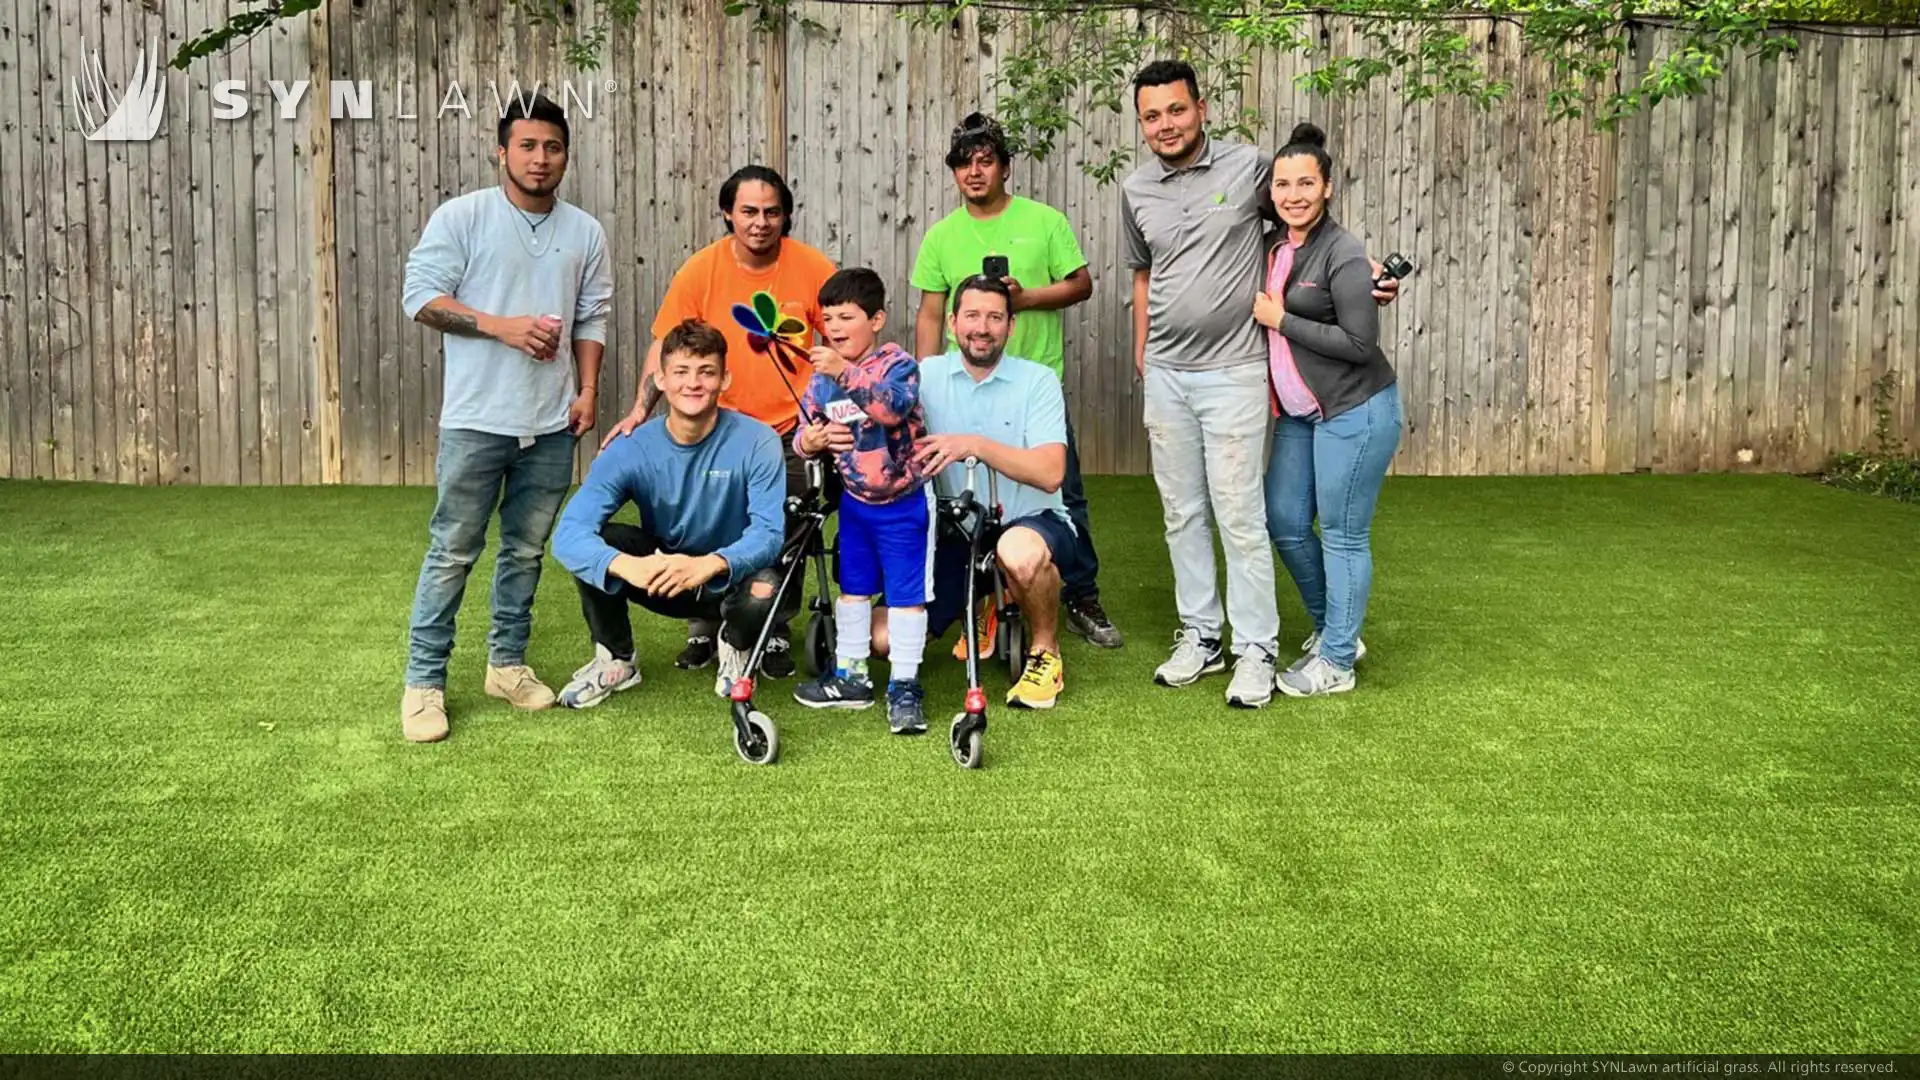 SYNLawn Builds Dream Backyard for Make-a-Wish Family